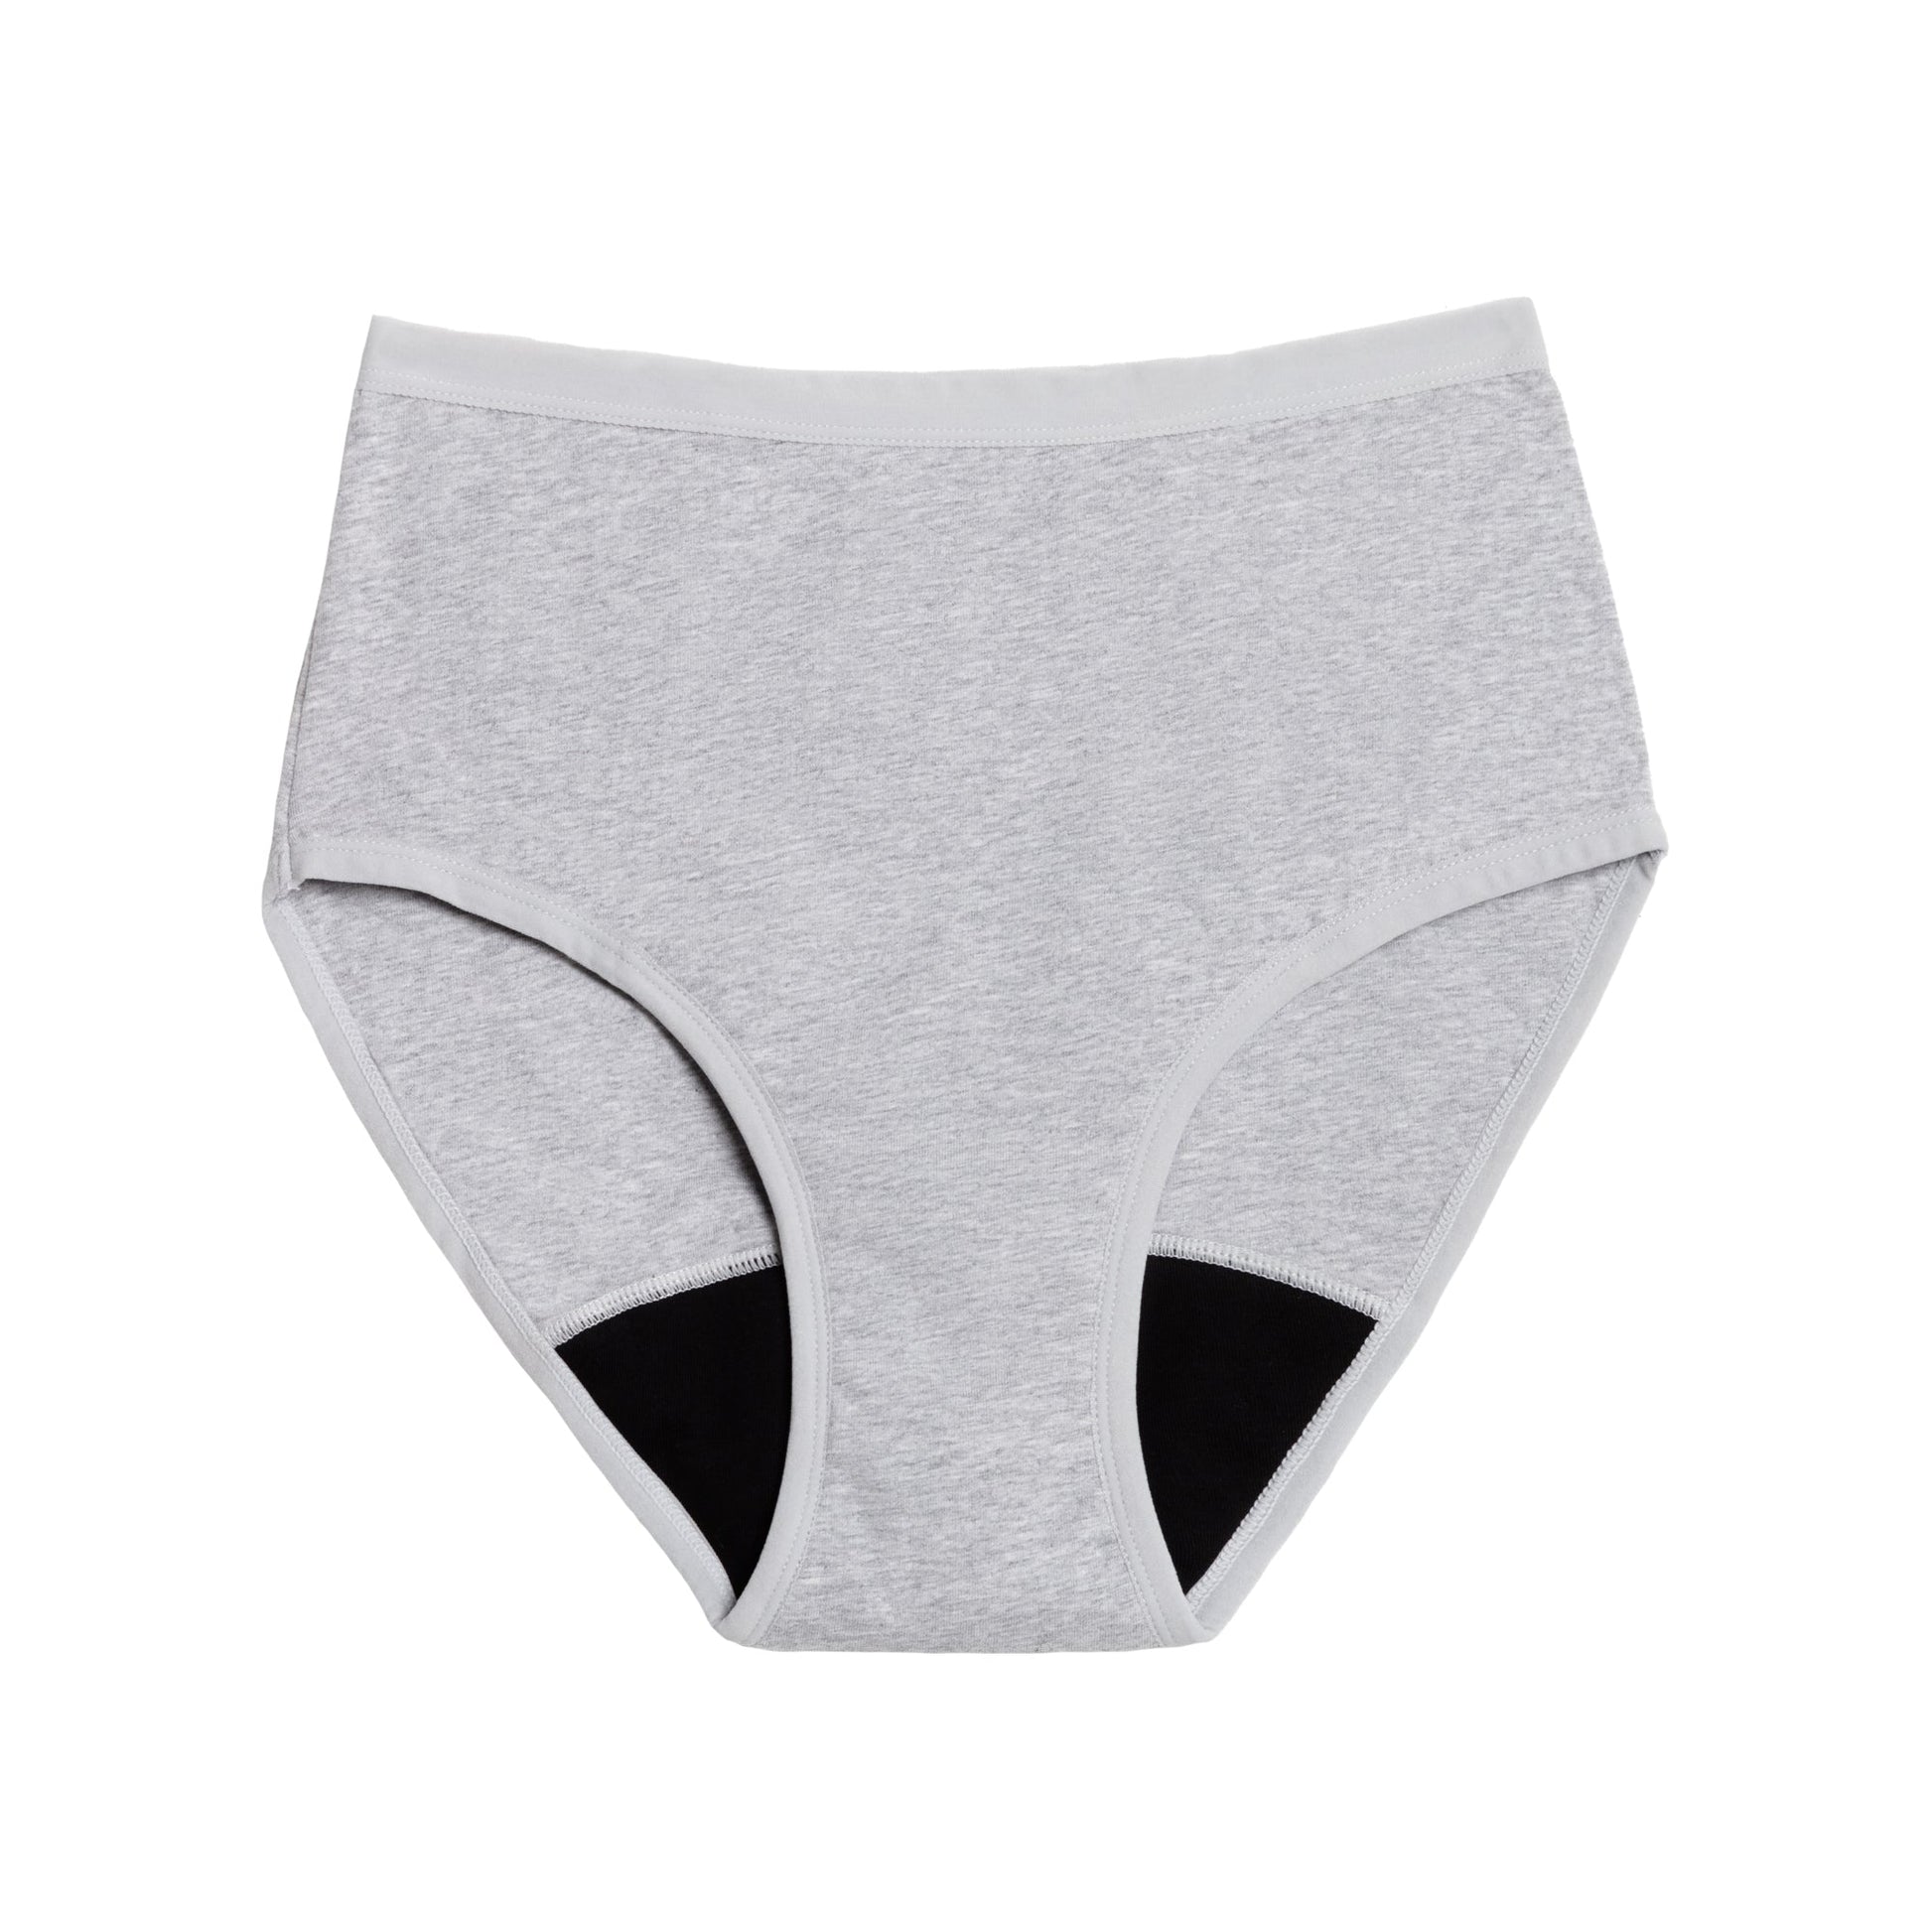 FSA-approved The High Waisted Period. in Sporty Stretch For Heavy Flows, XS  - 2X – BuyFSA